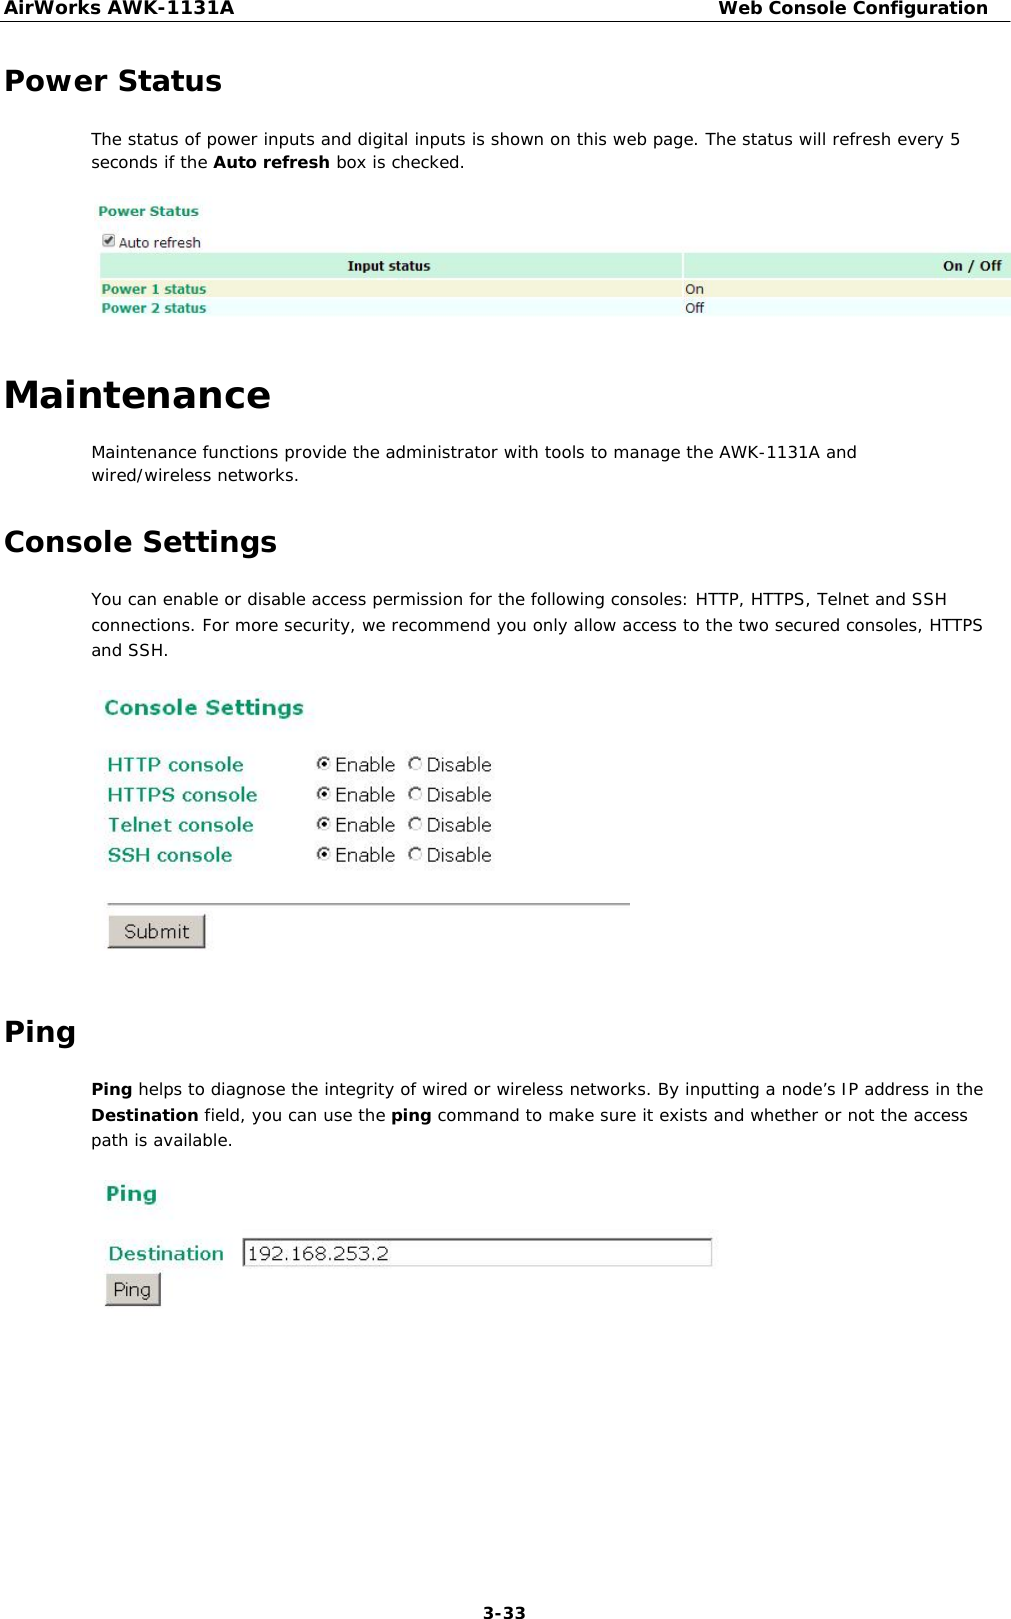 AirWorks AWK-1131A Web Console Configuration   Power Status  The status of power inputs and digital inputs is shown on this web page. The status will refresh every 5 seconds if the Auto refresh box is checked.          Maintenance  Maintenance functions provide the administrator with tools to manage the AWK-1131A and wired/wireless networks.  Console Settings  You can enable or disable access permission for the following consoles: HTTP, HTTPS, Telnet and SSH connections. For more security, we recommend you only allow access to the two secured consoles, HTTPS and SSH.                 Ping  Ping helps to diagnose the integrity of wired or wireless networks. By inputting a node’s IP address in the Destination field, you can use the ping command to make sure it exists and whether or not the access path is available.                      3-33 